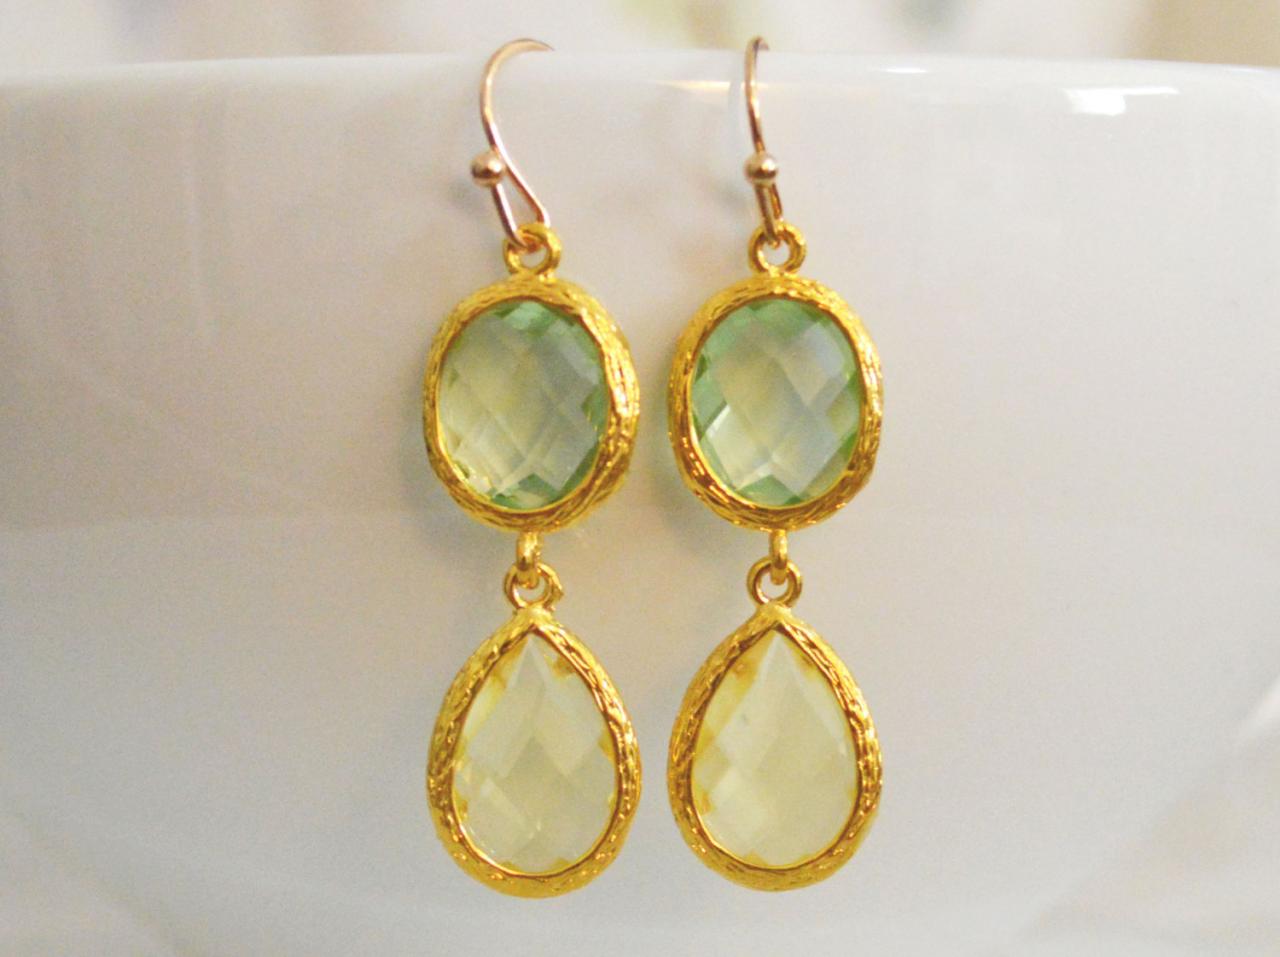 Glass Drop Earrings, Chrysolite & Lemon Yellow Drop Earrings, Dangle Earrings, Gold Plated/bridesmaid Gifts/everyday Jewelry/